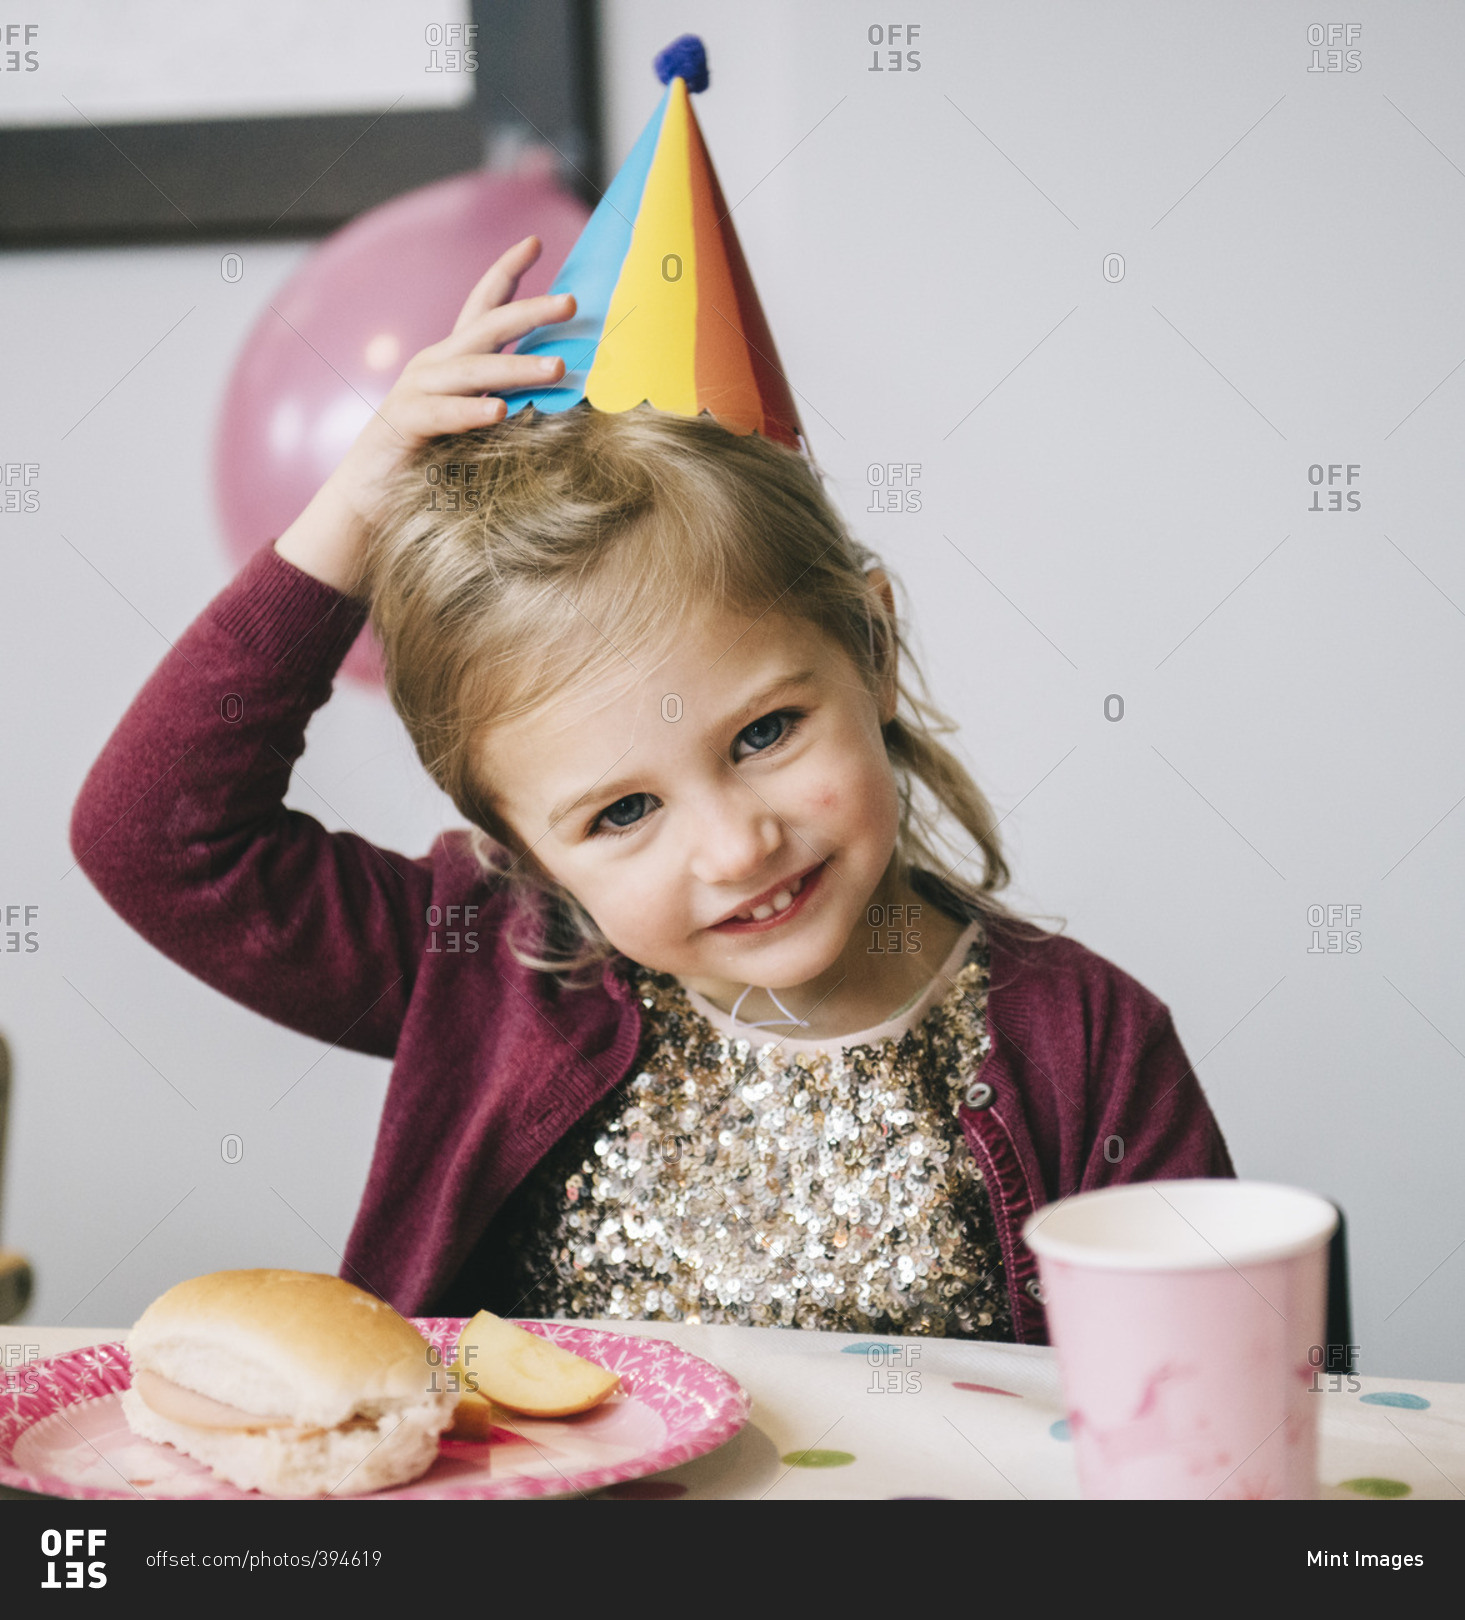 A young girl in a party hat at a birthday party